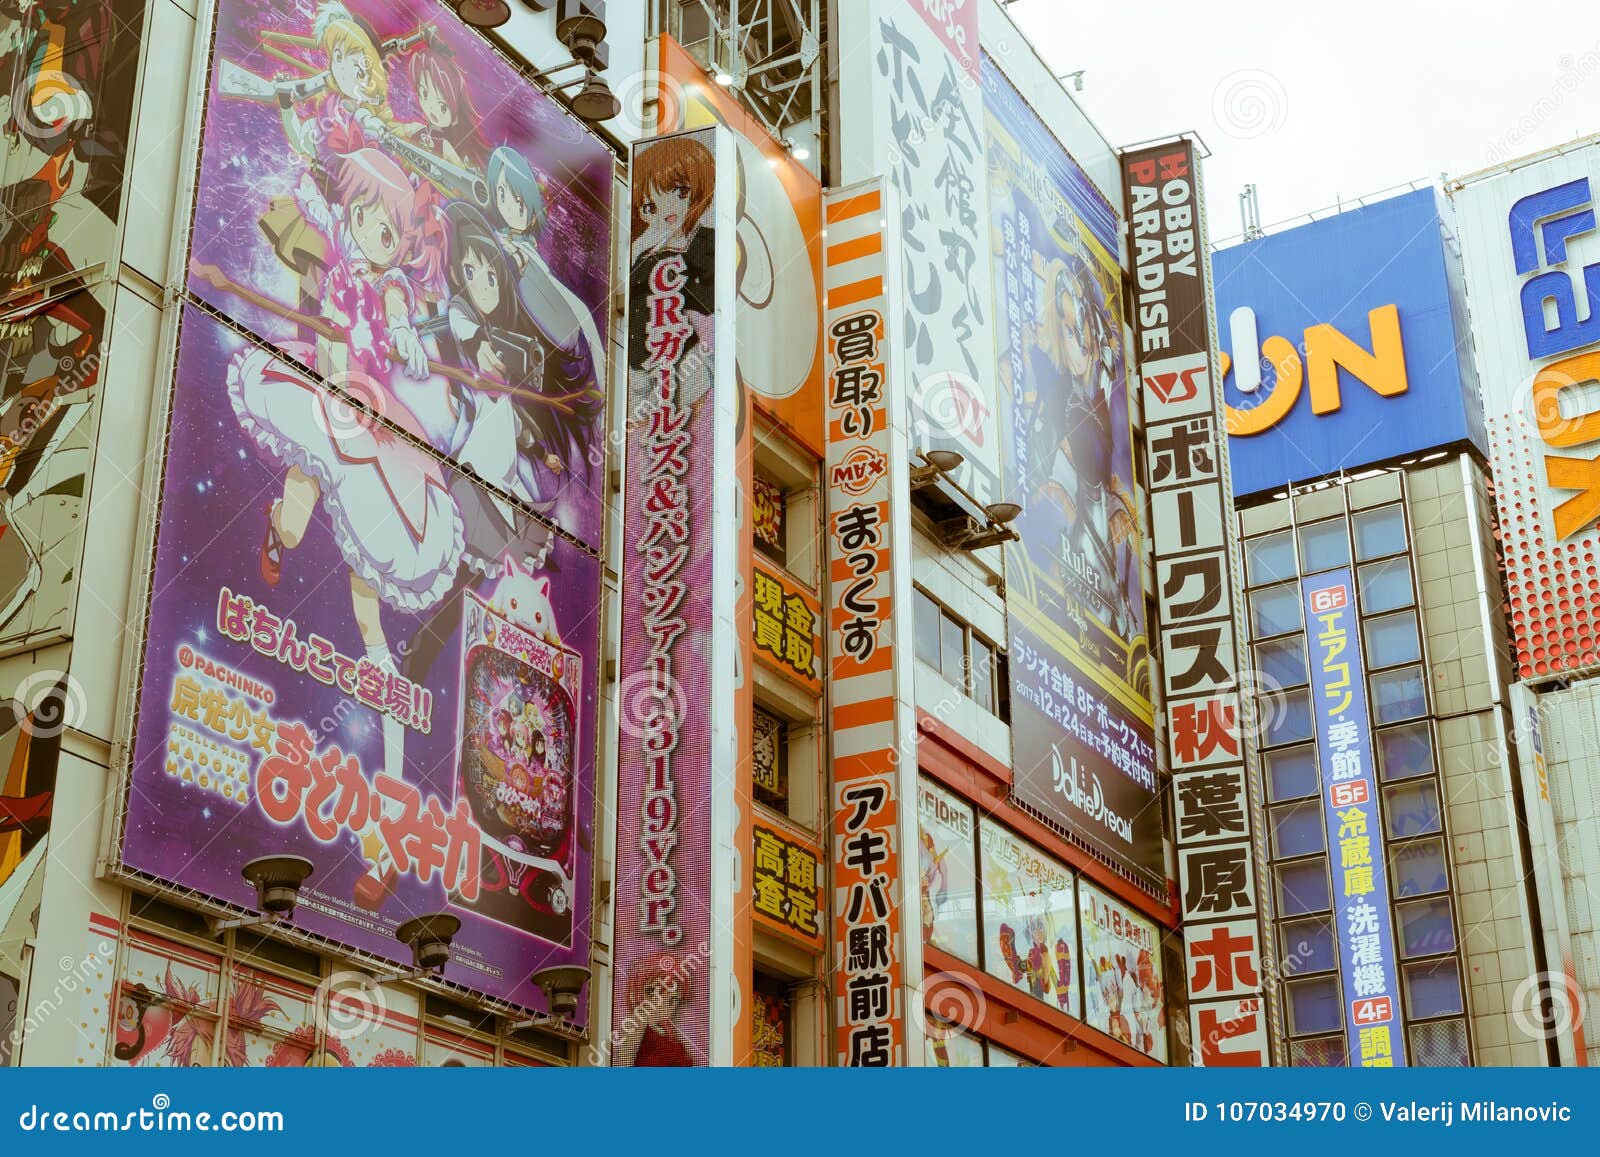 Akihabara Electric Town - Must-See, Access, Hours & Price | GOOD LUCK TRIP